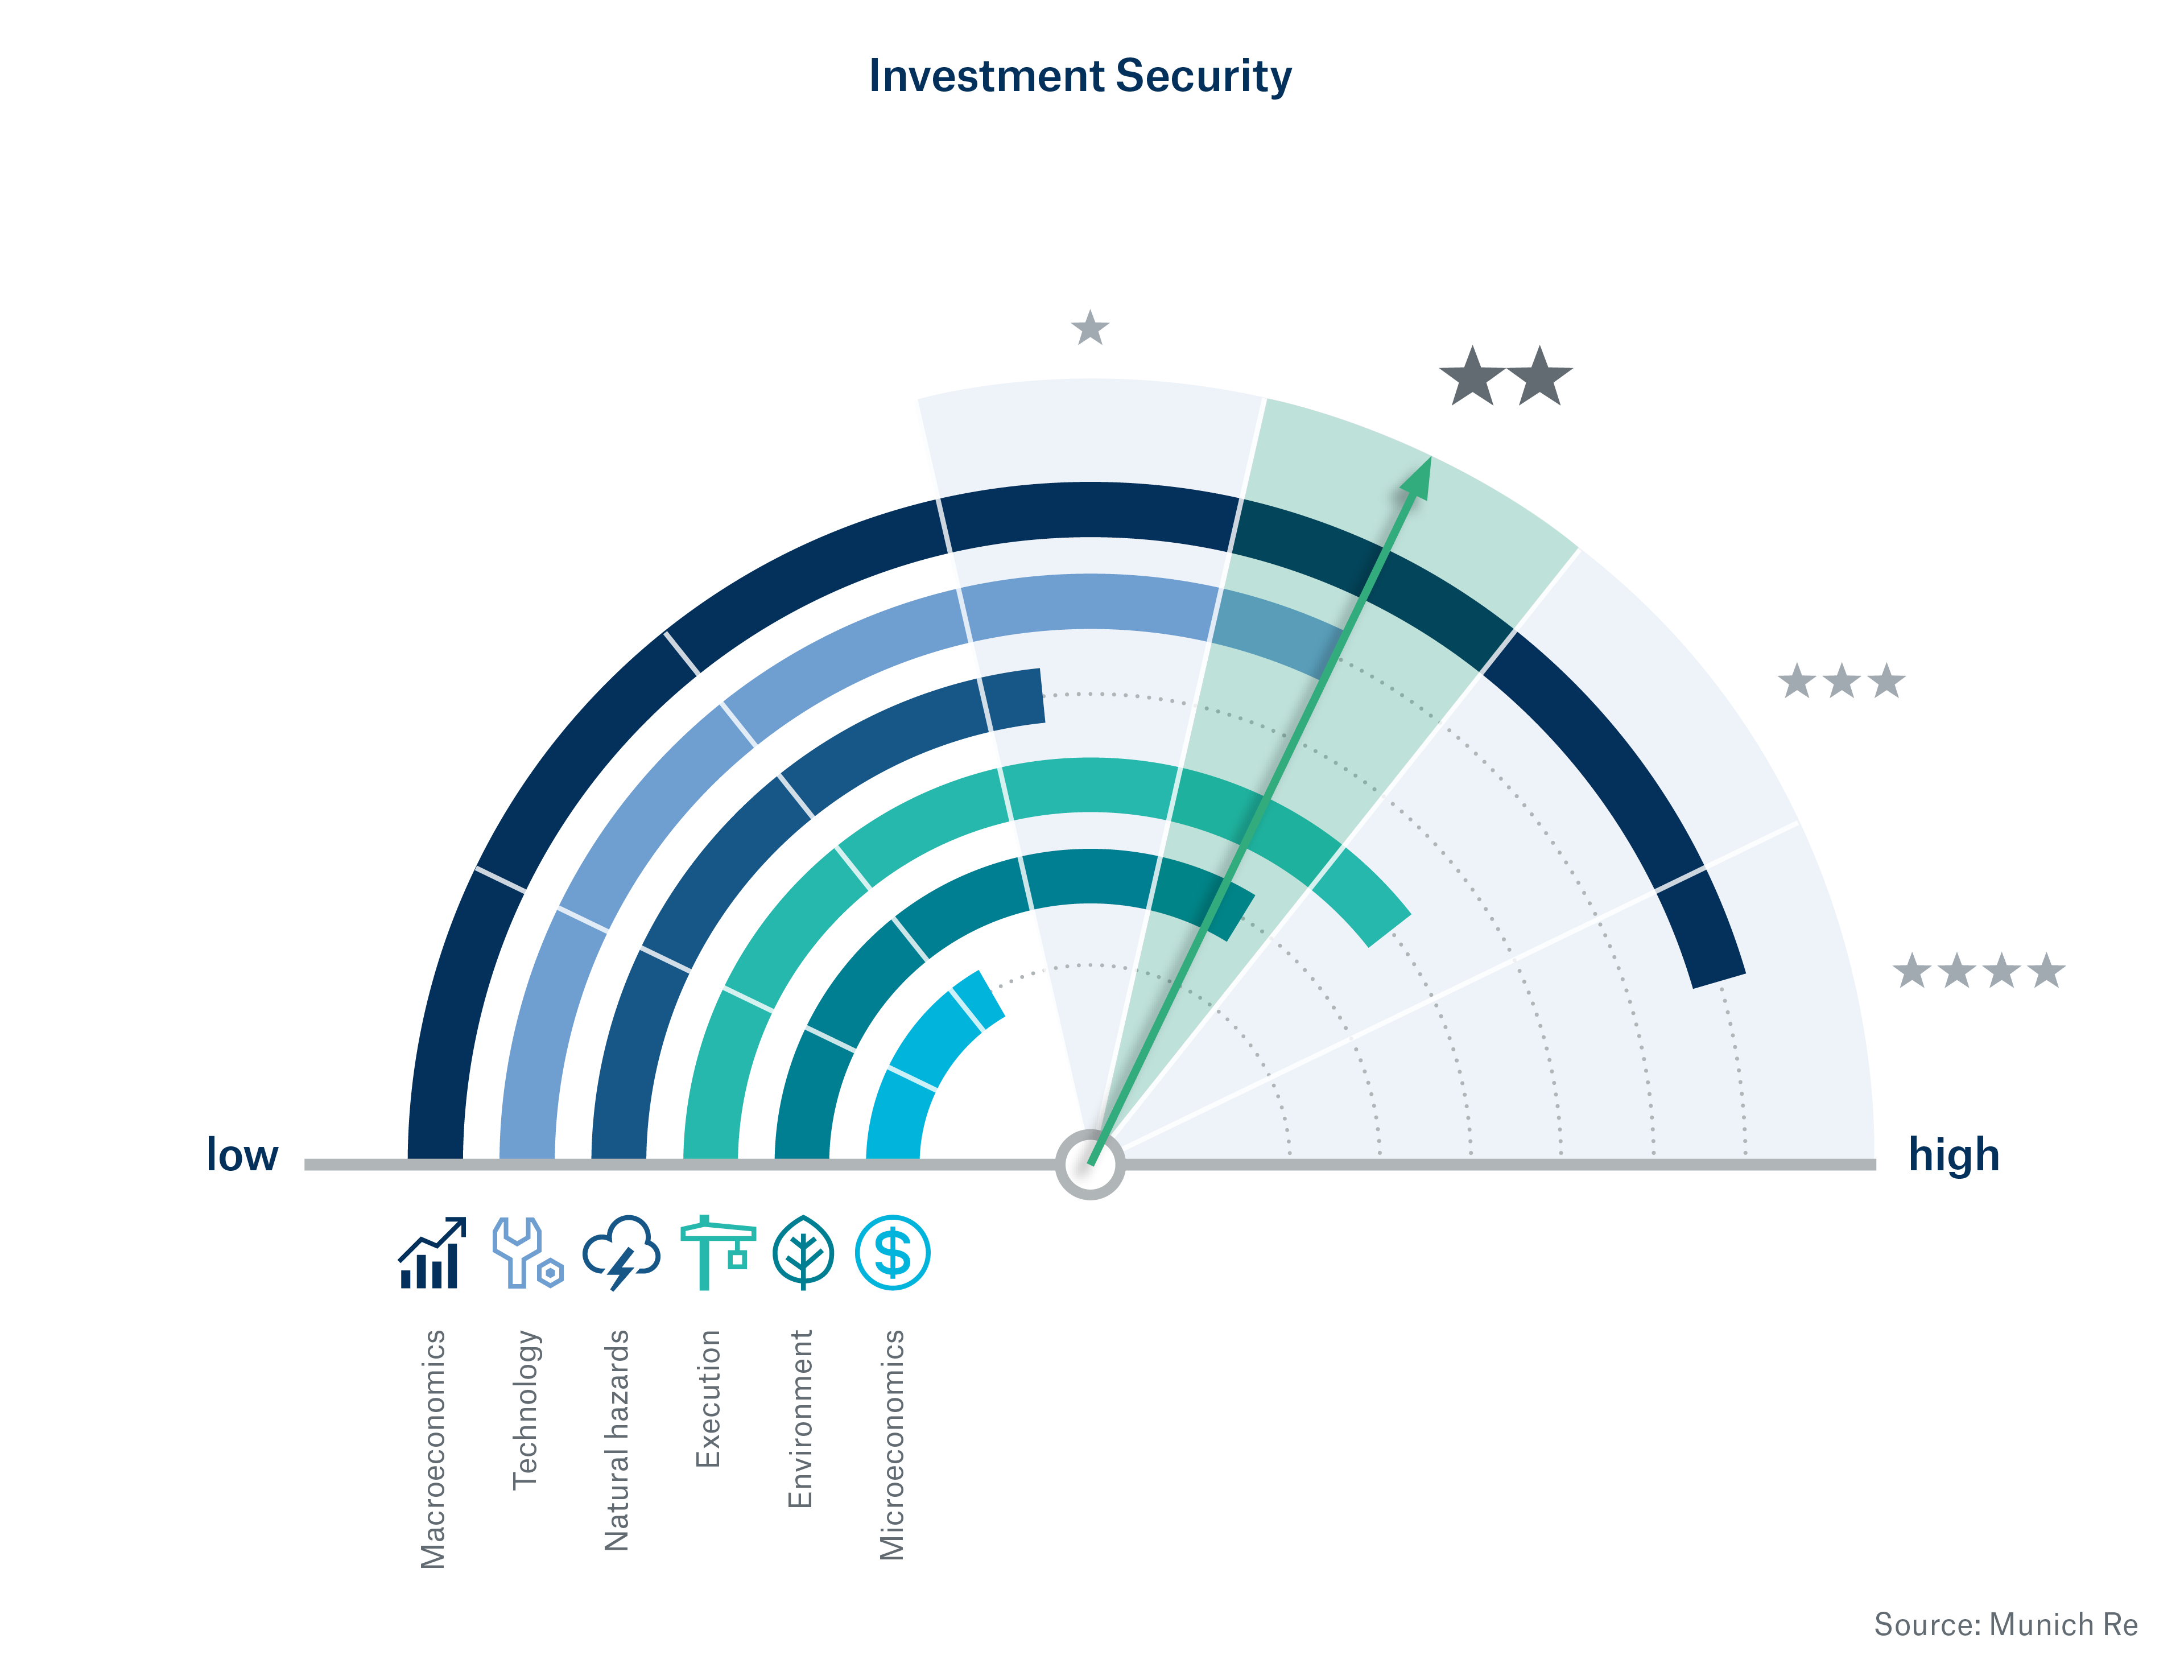 Risk profiles of infrastructure investments clearly revealed – Transparent risk profiles lead to diligent investments